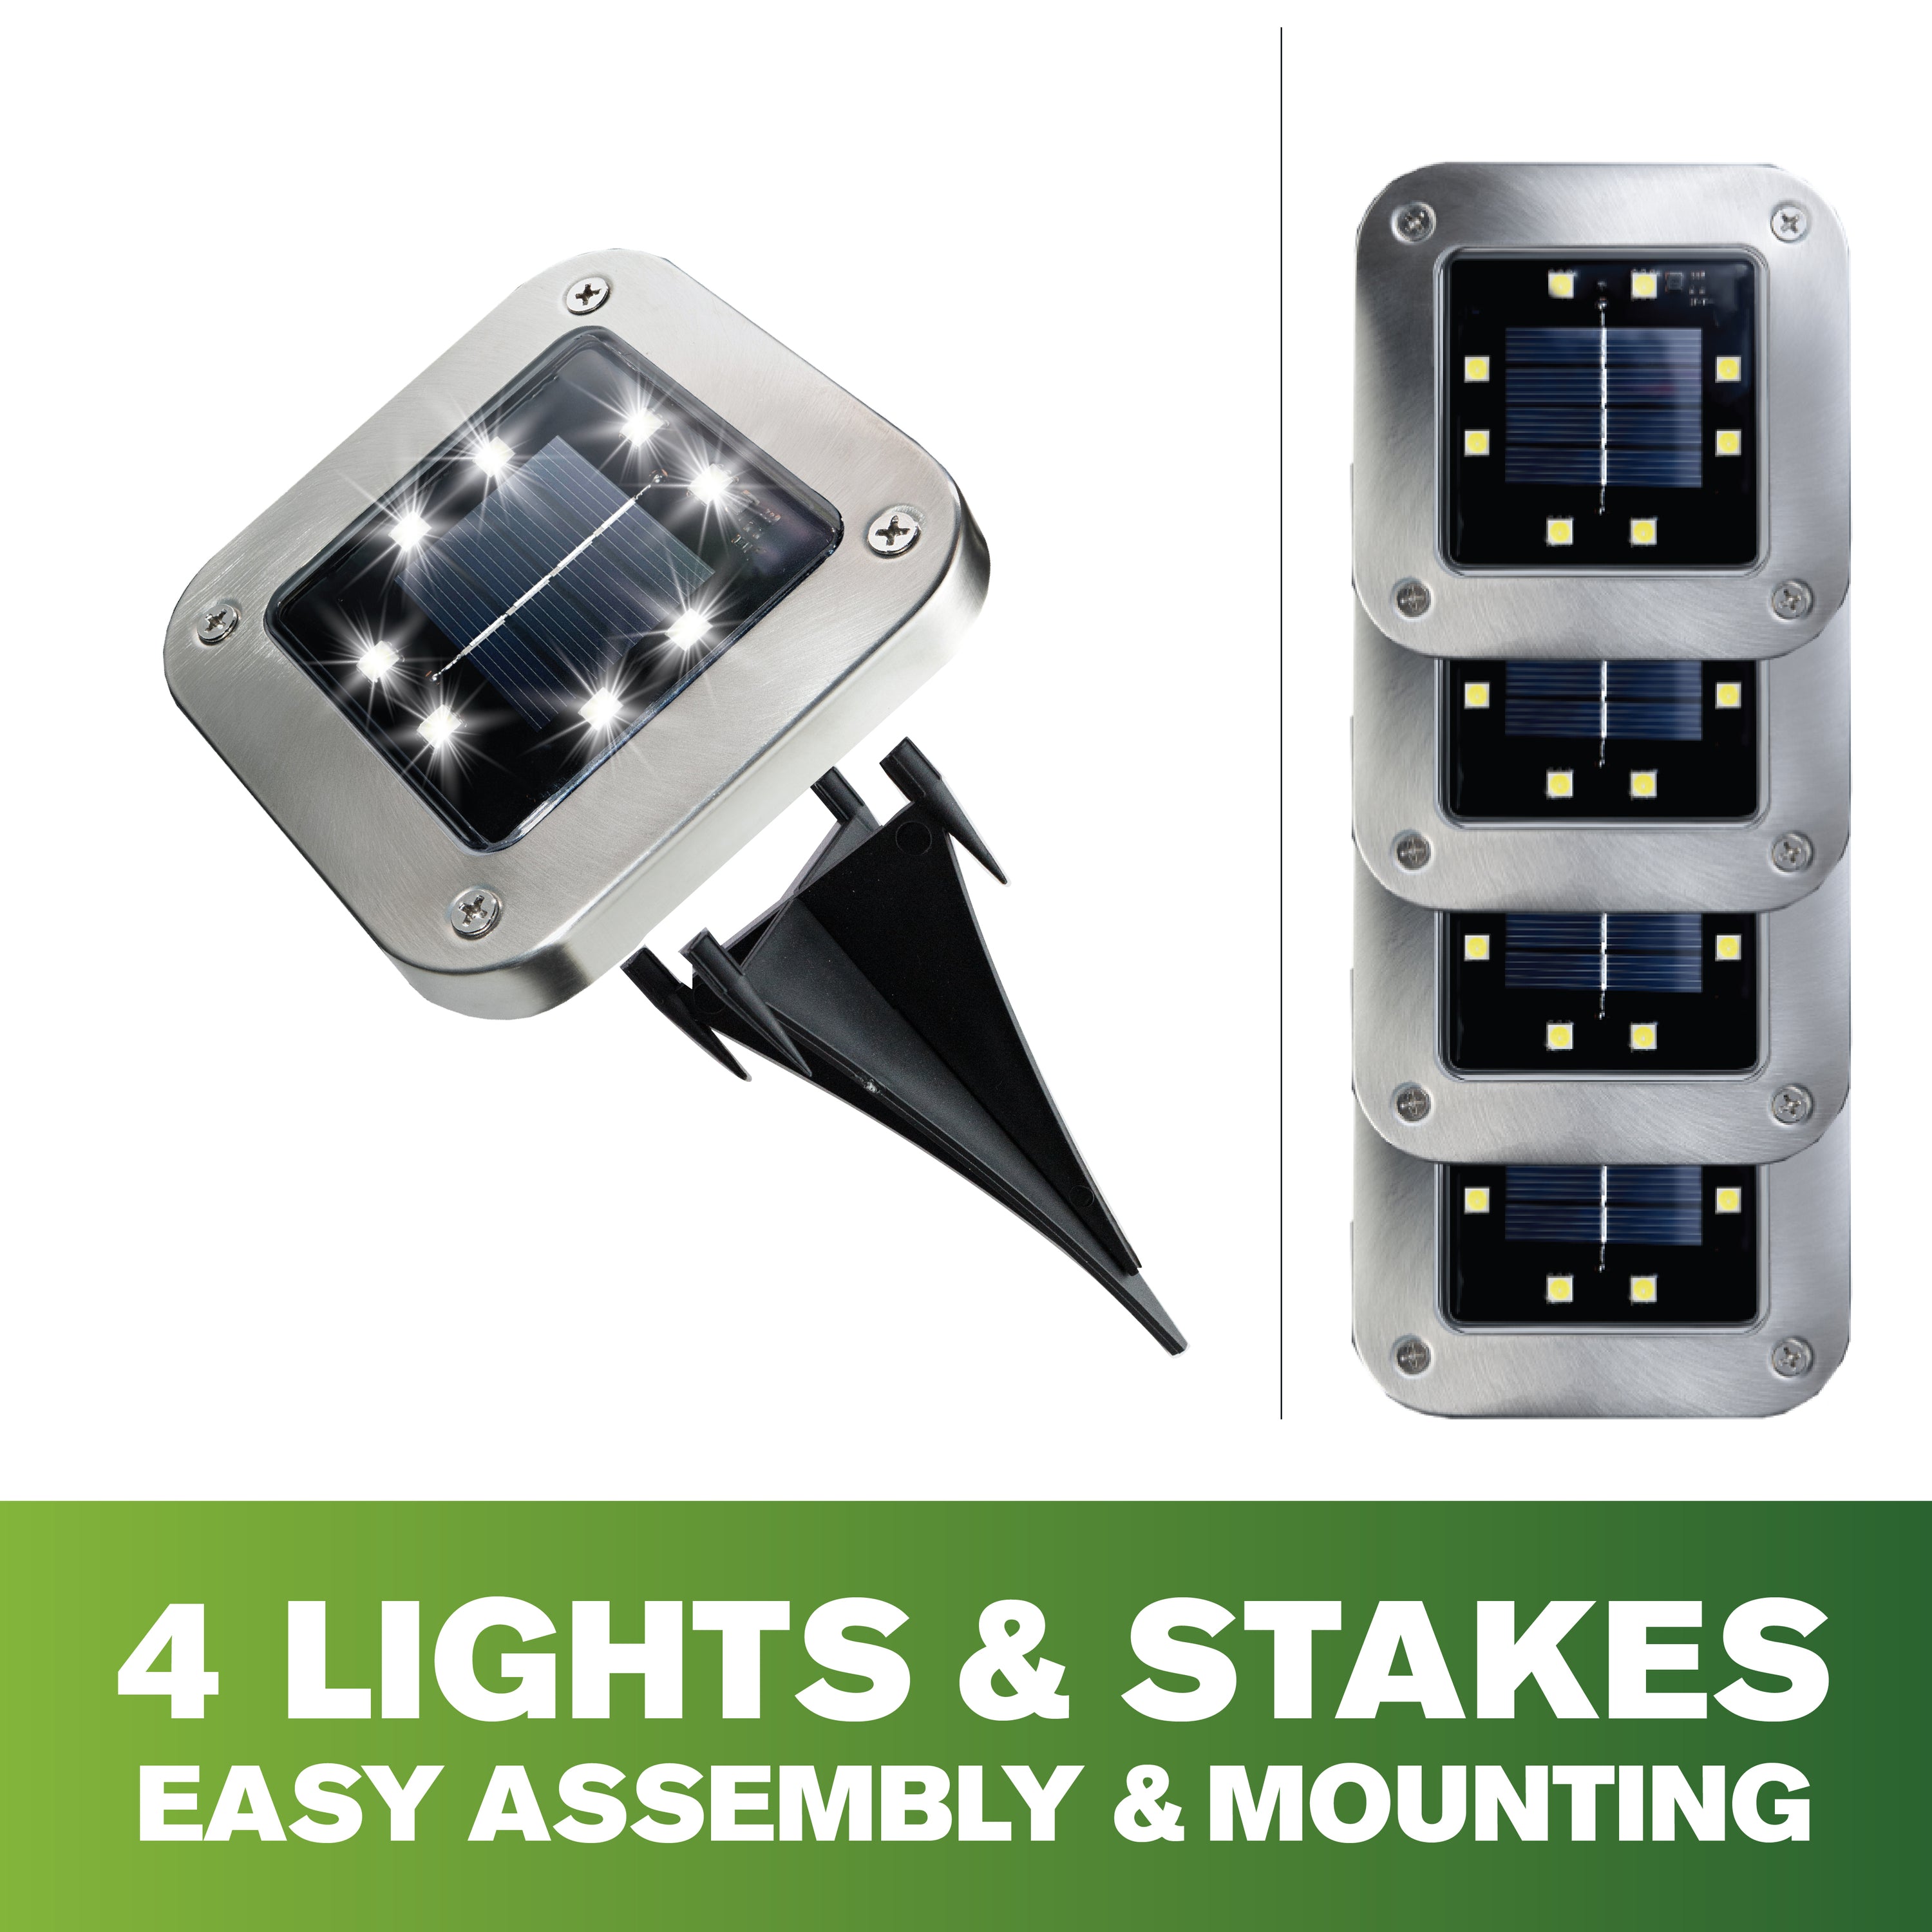 Bell + Howell Stainless Steel Pathway & Landscape Disk Light Square 4 Pack with 8 LED